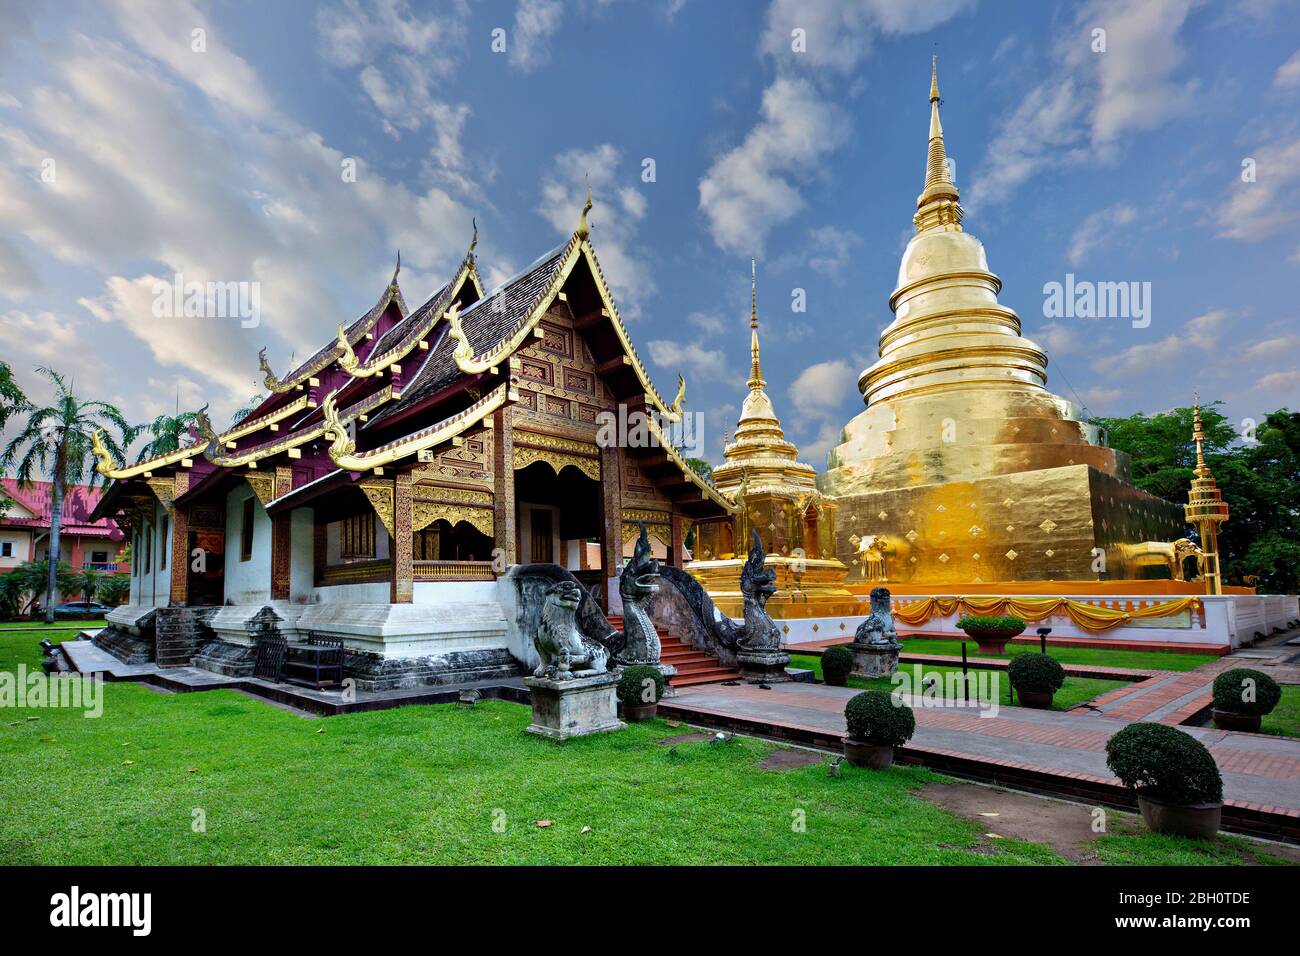 Buddhist temple known as Wat Phra Singh, in Chiang Mai, Thailand. Stock Photo